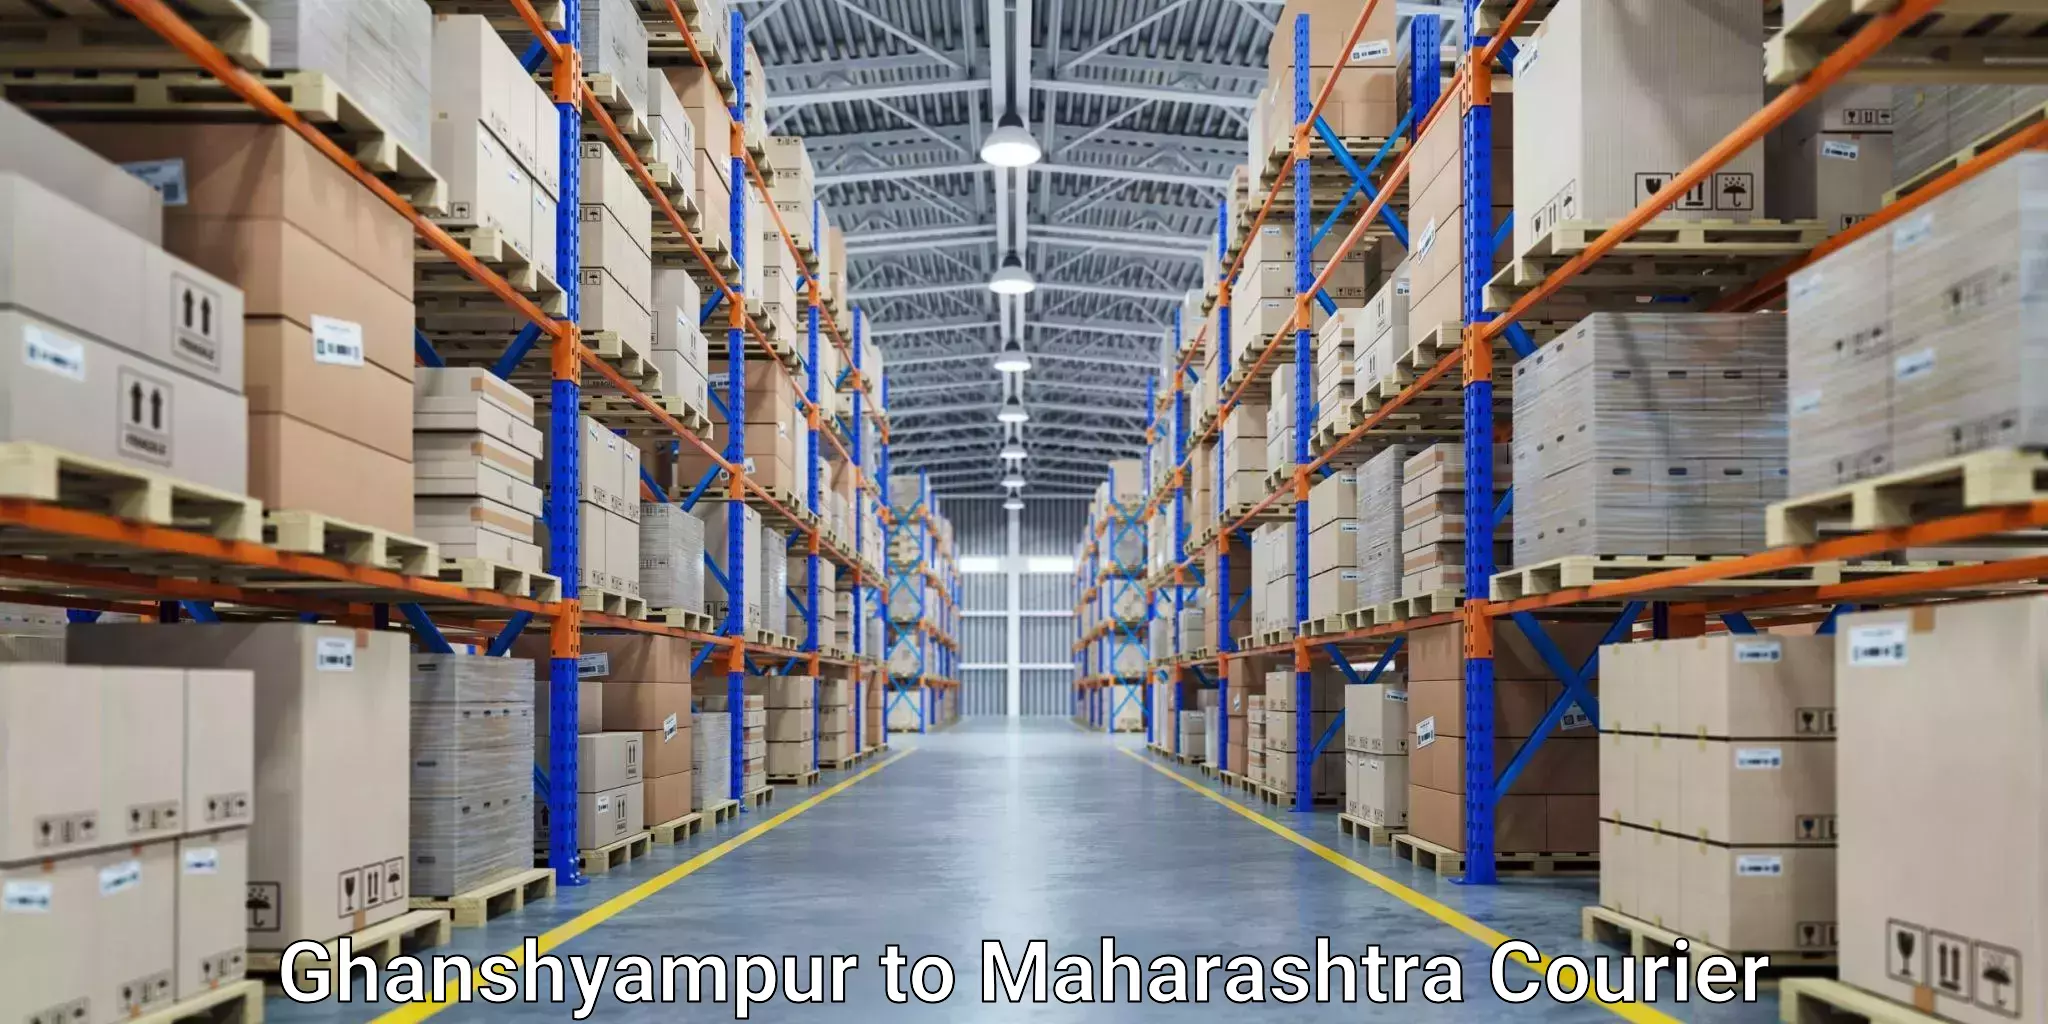 Customer-oriented courier services in Ghanshyampur to Baramati